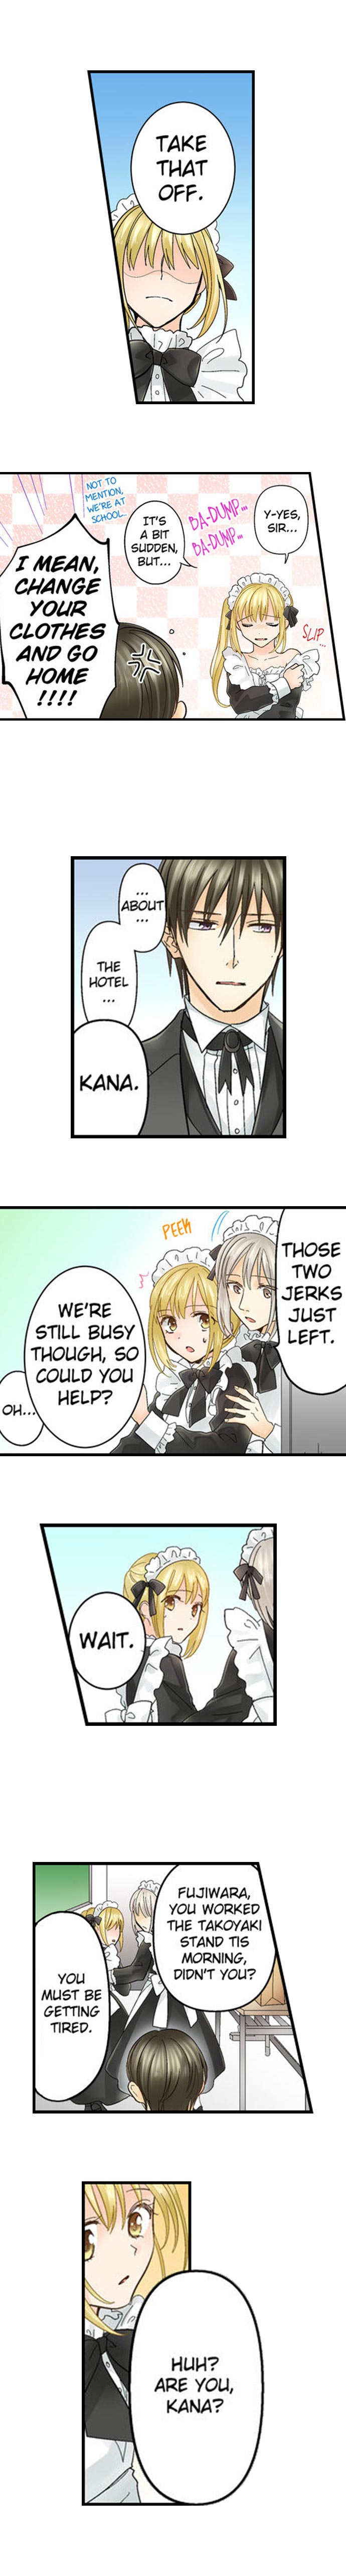 Running a Love Hotel with My Math Teacher - Chapter 33 Page 3